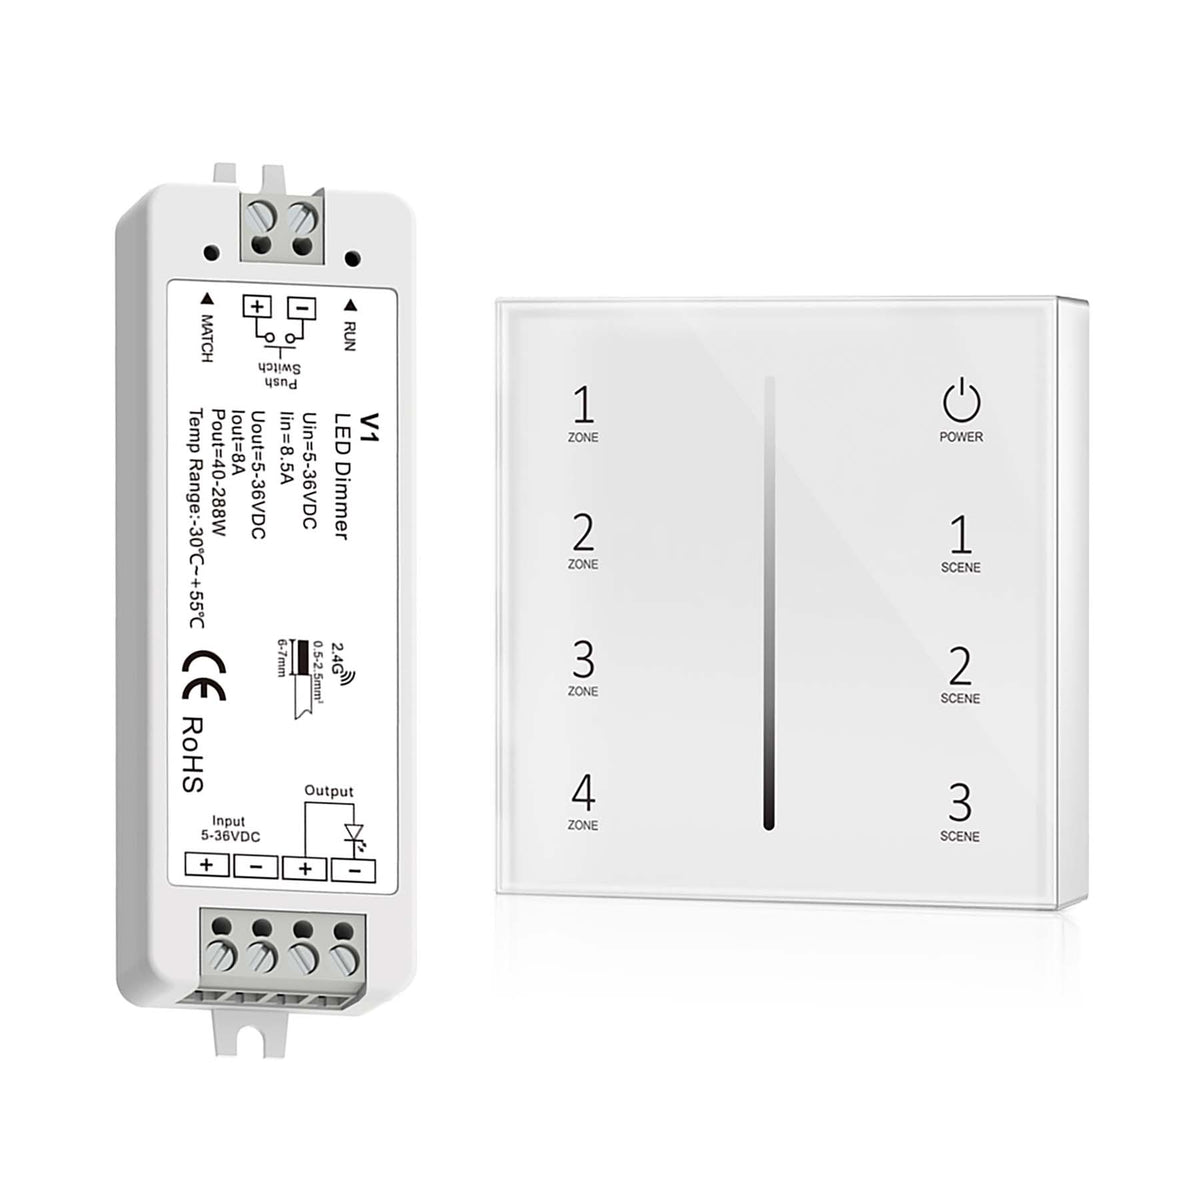 G.W.S. LED White LED 5-36V DC Dimming Controller V1 + 4 Zone Panel Remote Control 2*AAA Battery T21